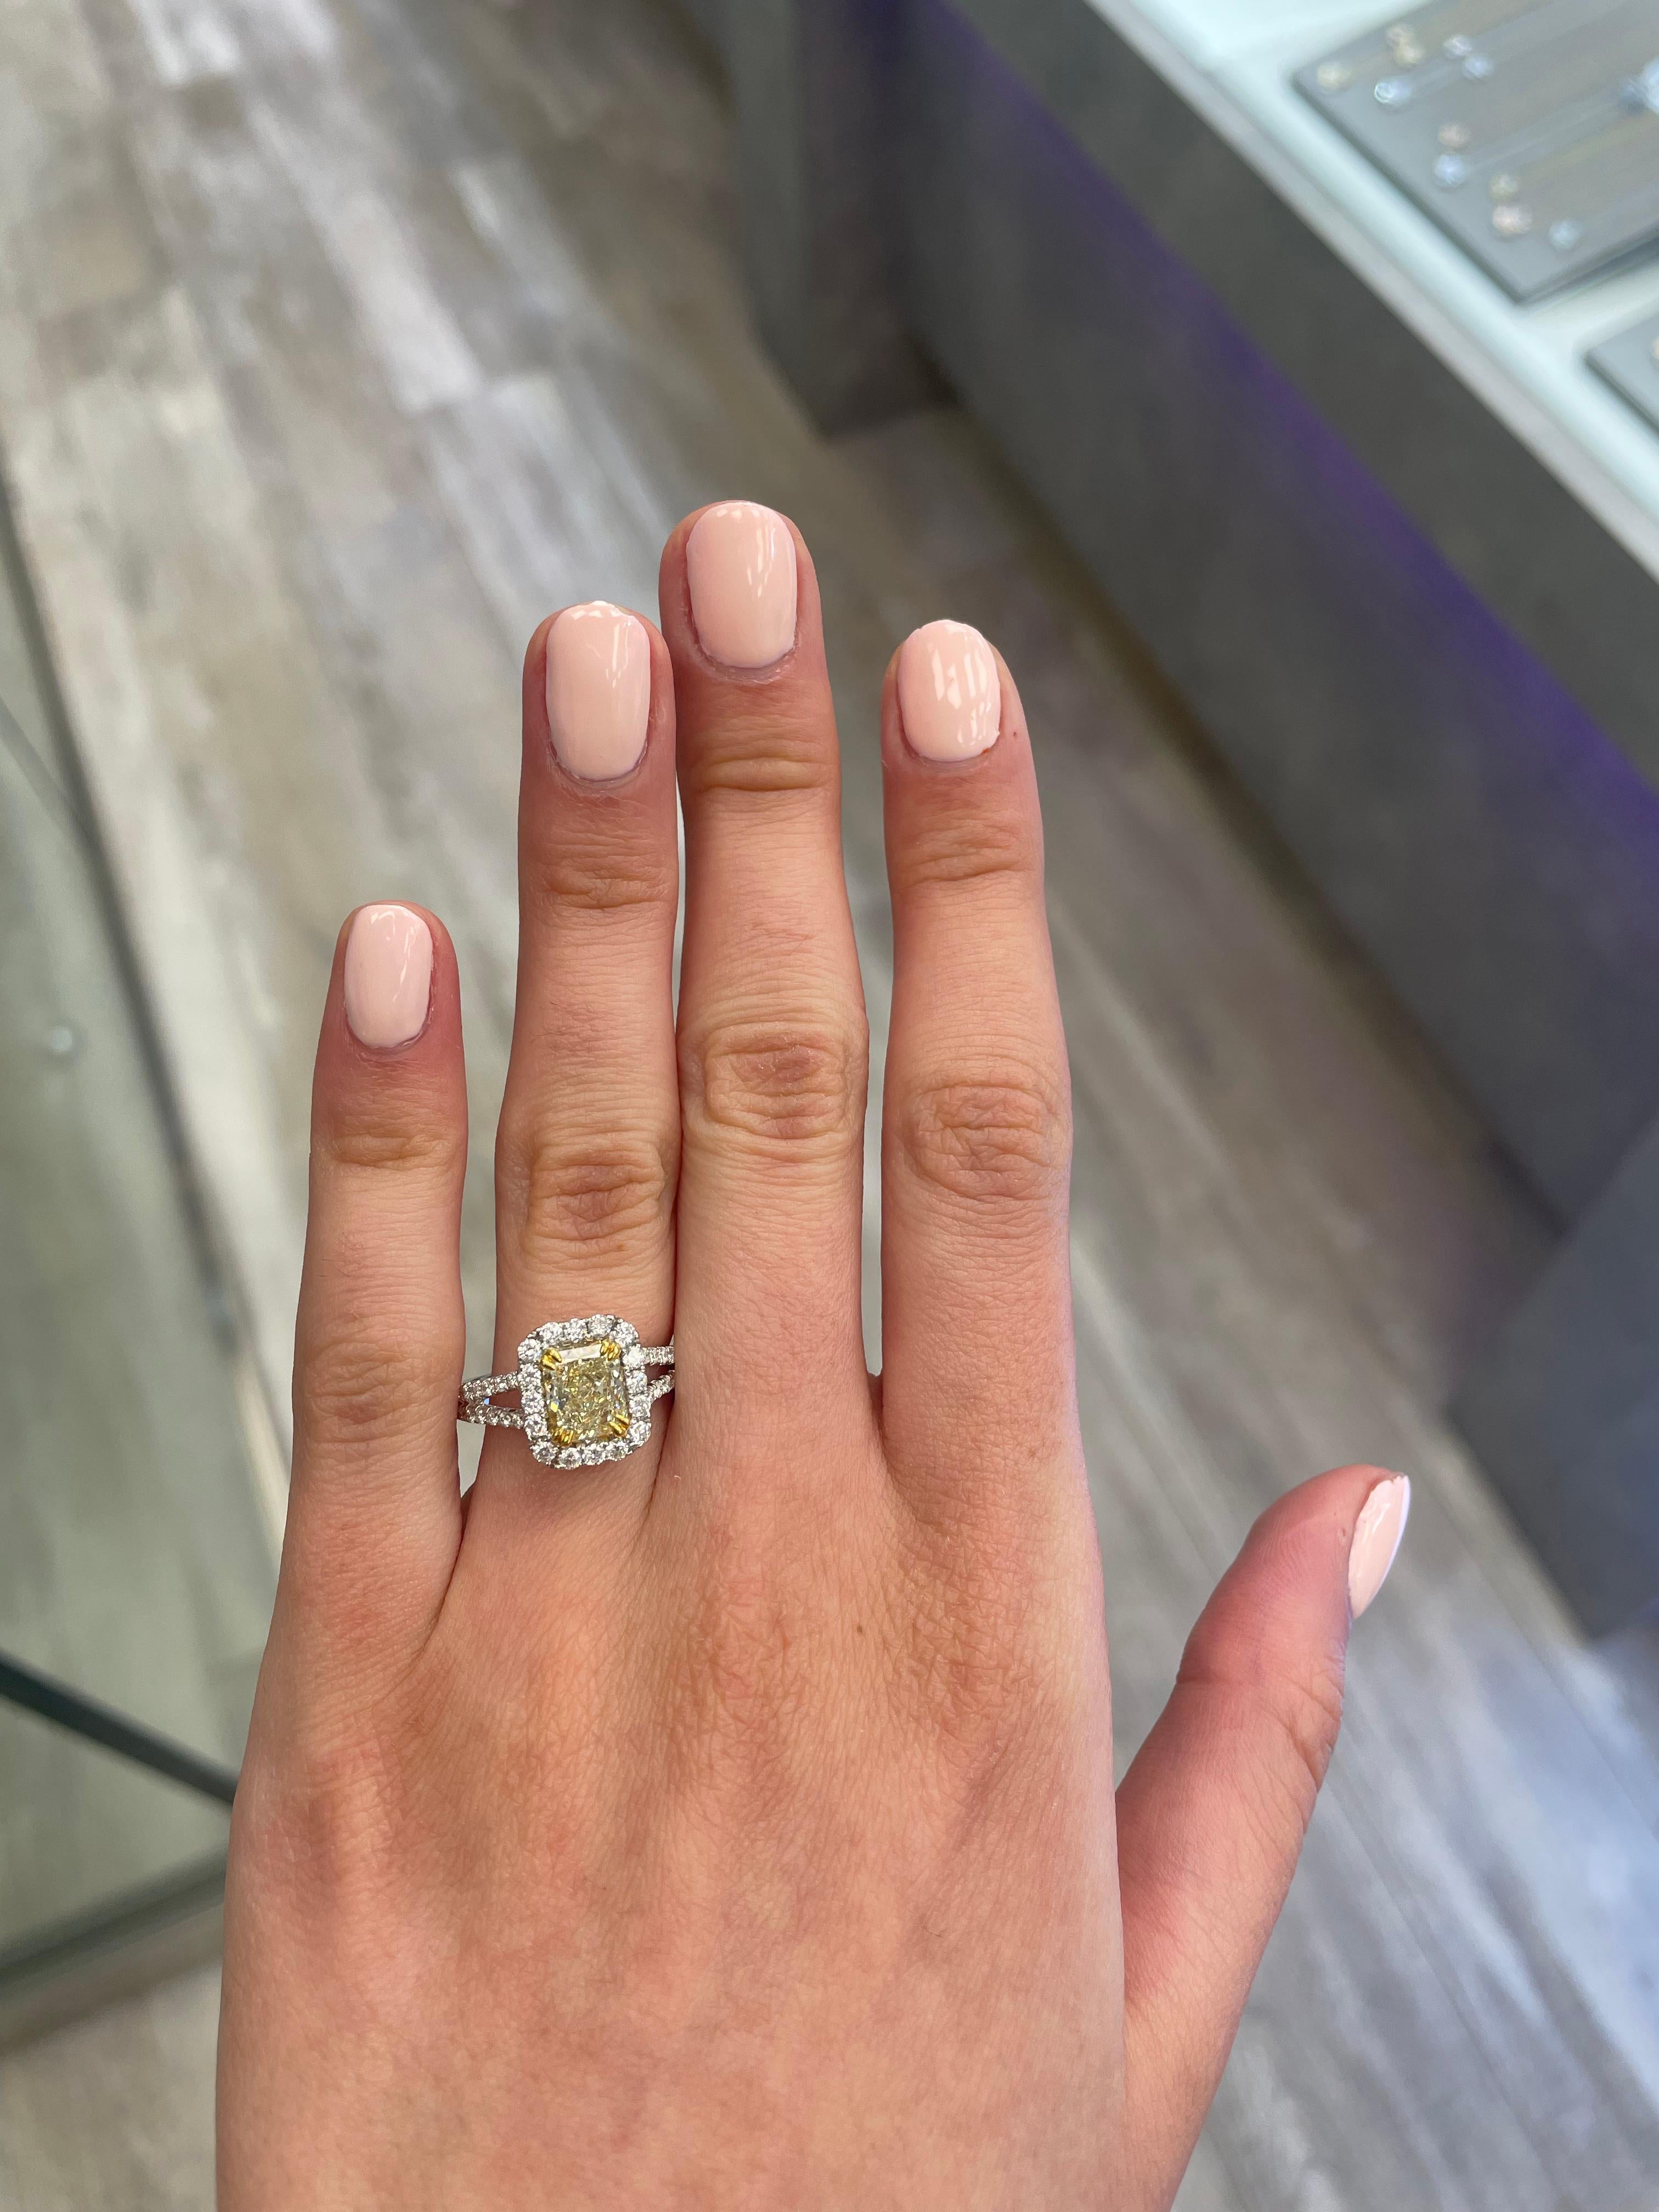 Stunning modern EGL certified yellow diamond with halo ring, two-tone 18k yellow and white gold, split shank. By Alexander Beverly Hills
2.42 carats total diamond weight.
1.75 carat radiant cut Fancy Light Yellow color and SI1 clarity diamond, EGL